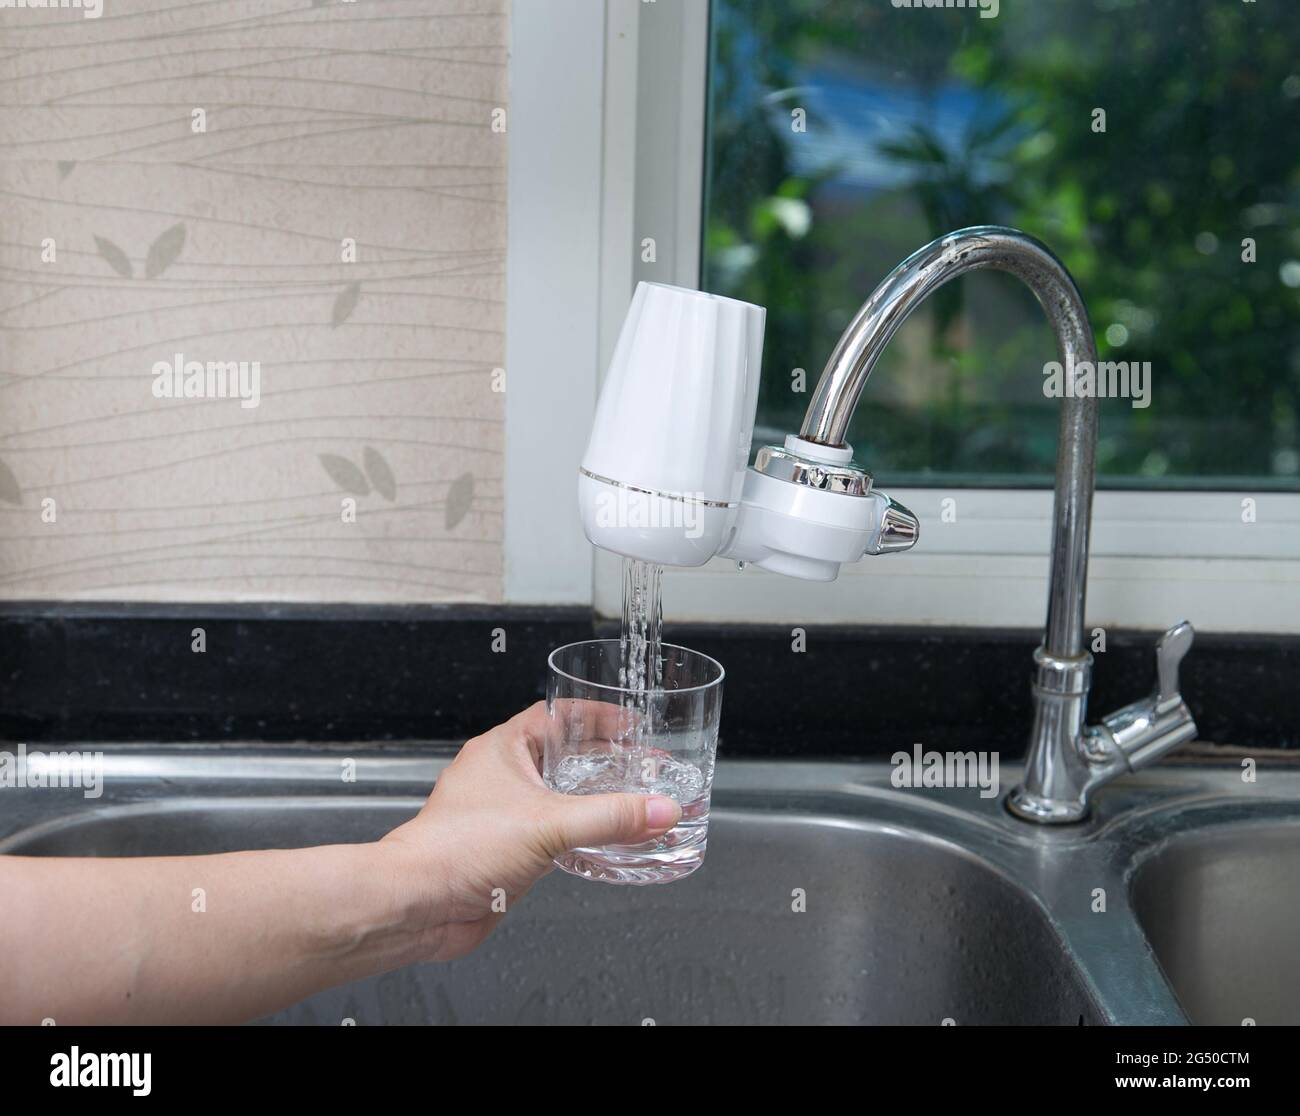 woman pouring water into glass from the water filter in the kitchen. Pouring clean fresh drink. Stock Photo